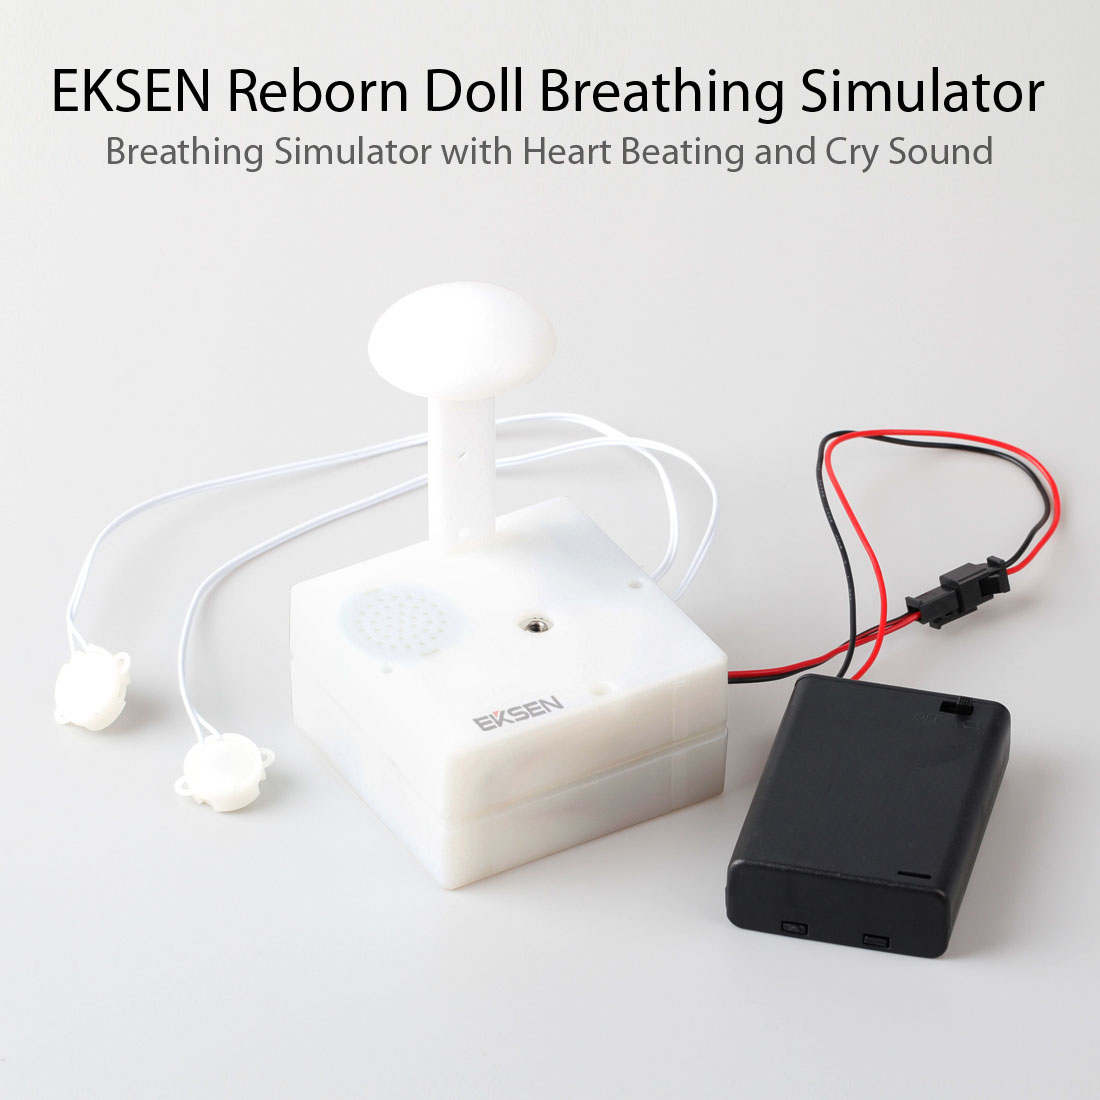 2 Key Button Breathing Simulator Heart kloppend met Cry Sound voor Reborn Doll.